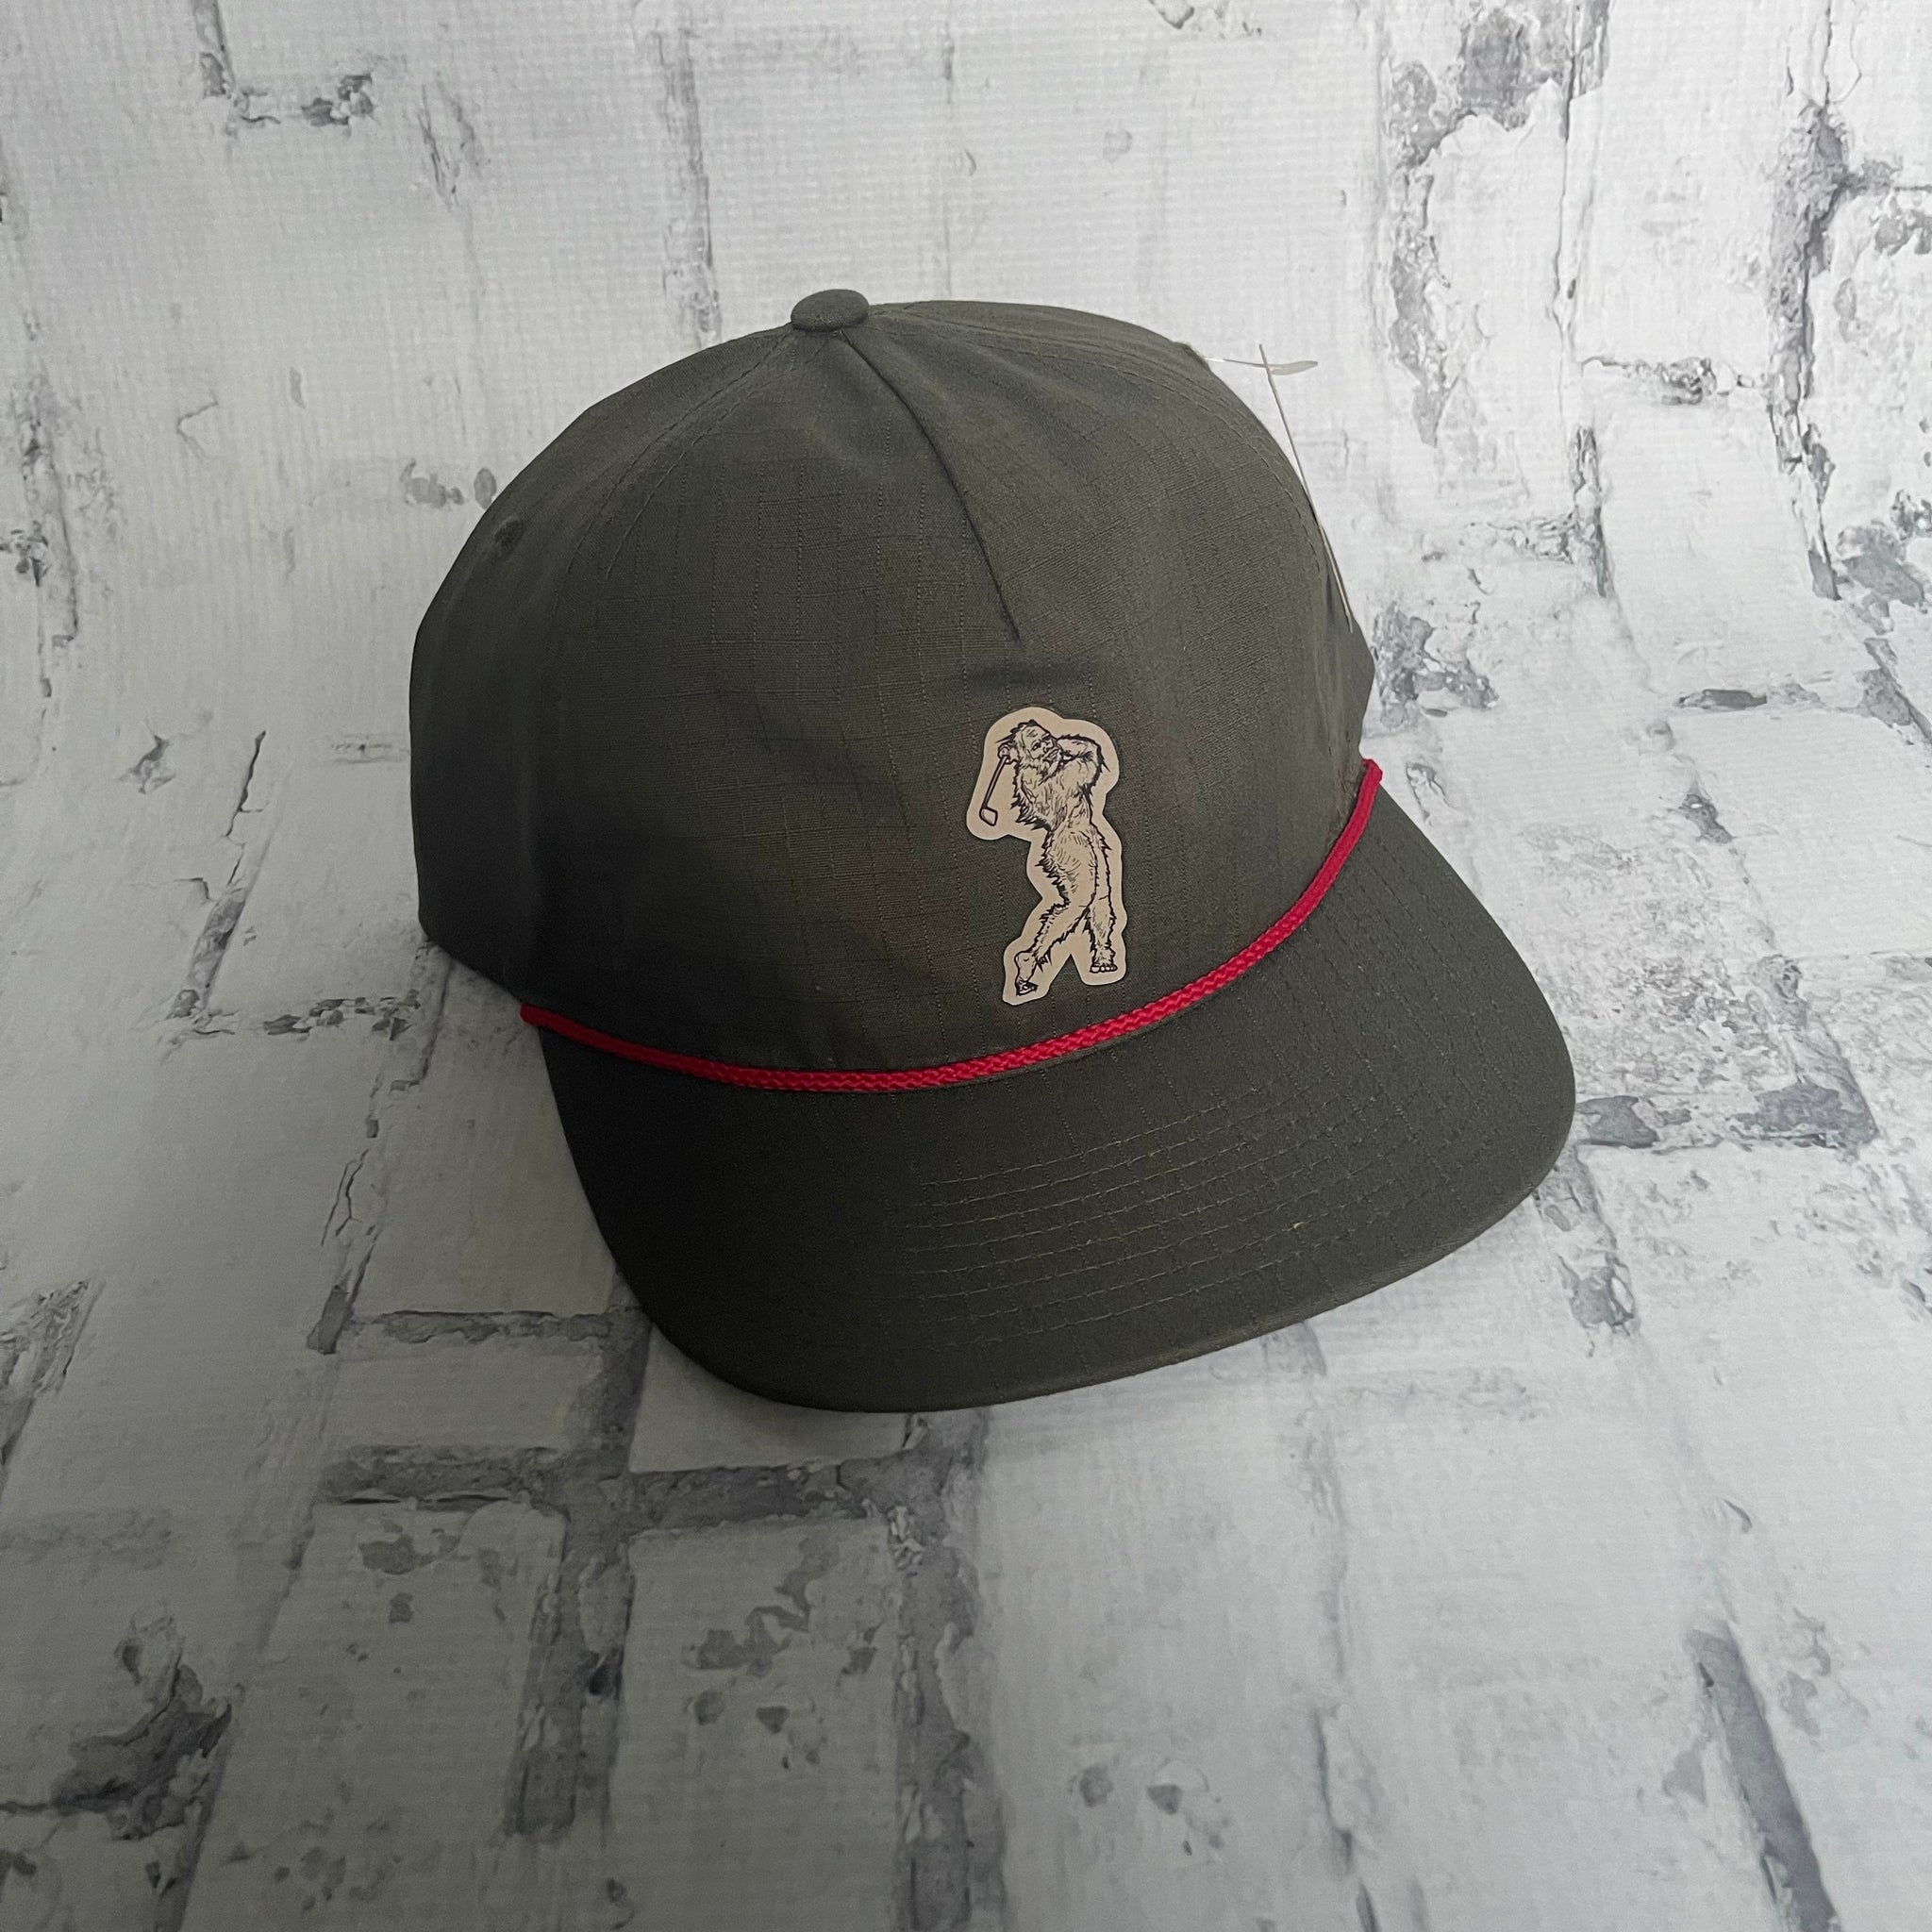 Hammer Down "Sasquatch Golf Swing" Hat - Moss Green with Red Rope